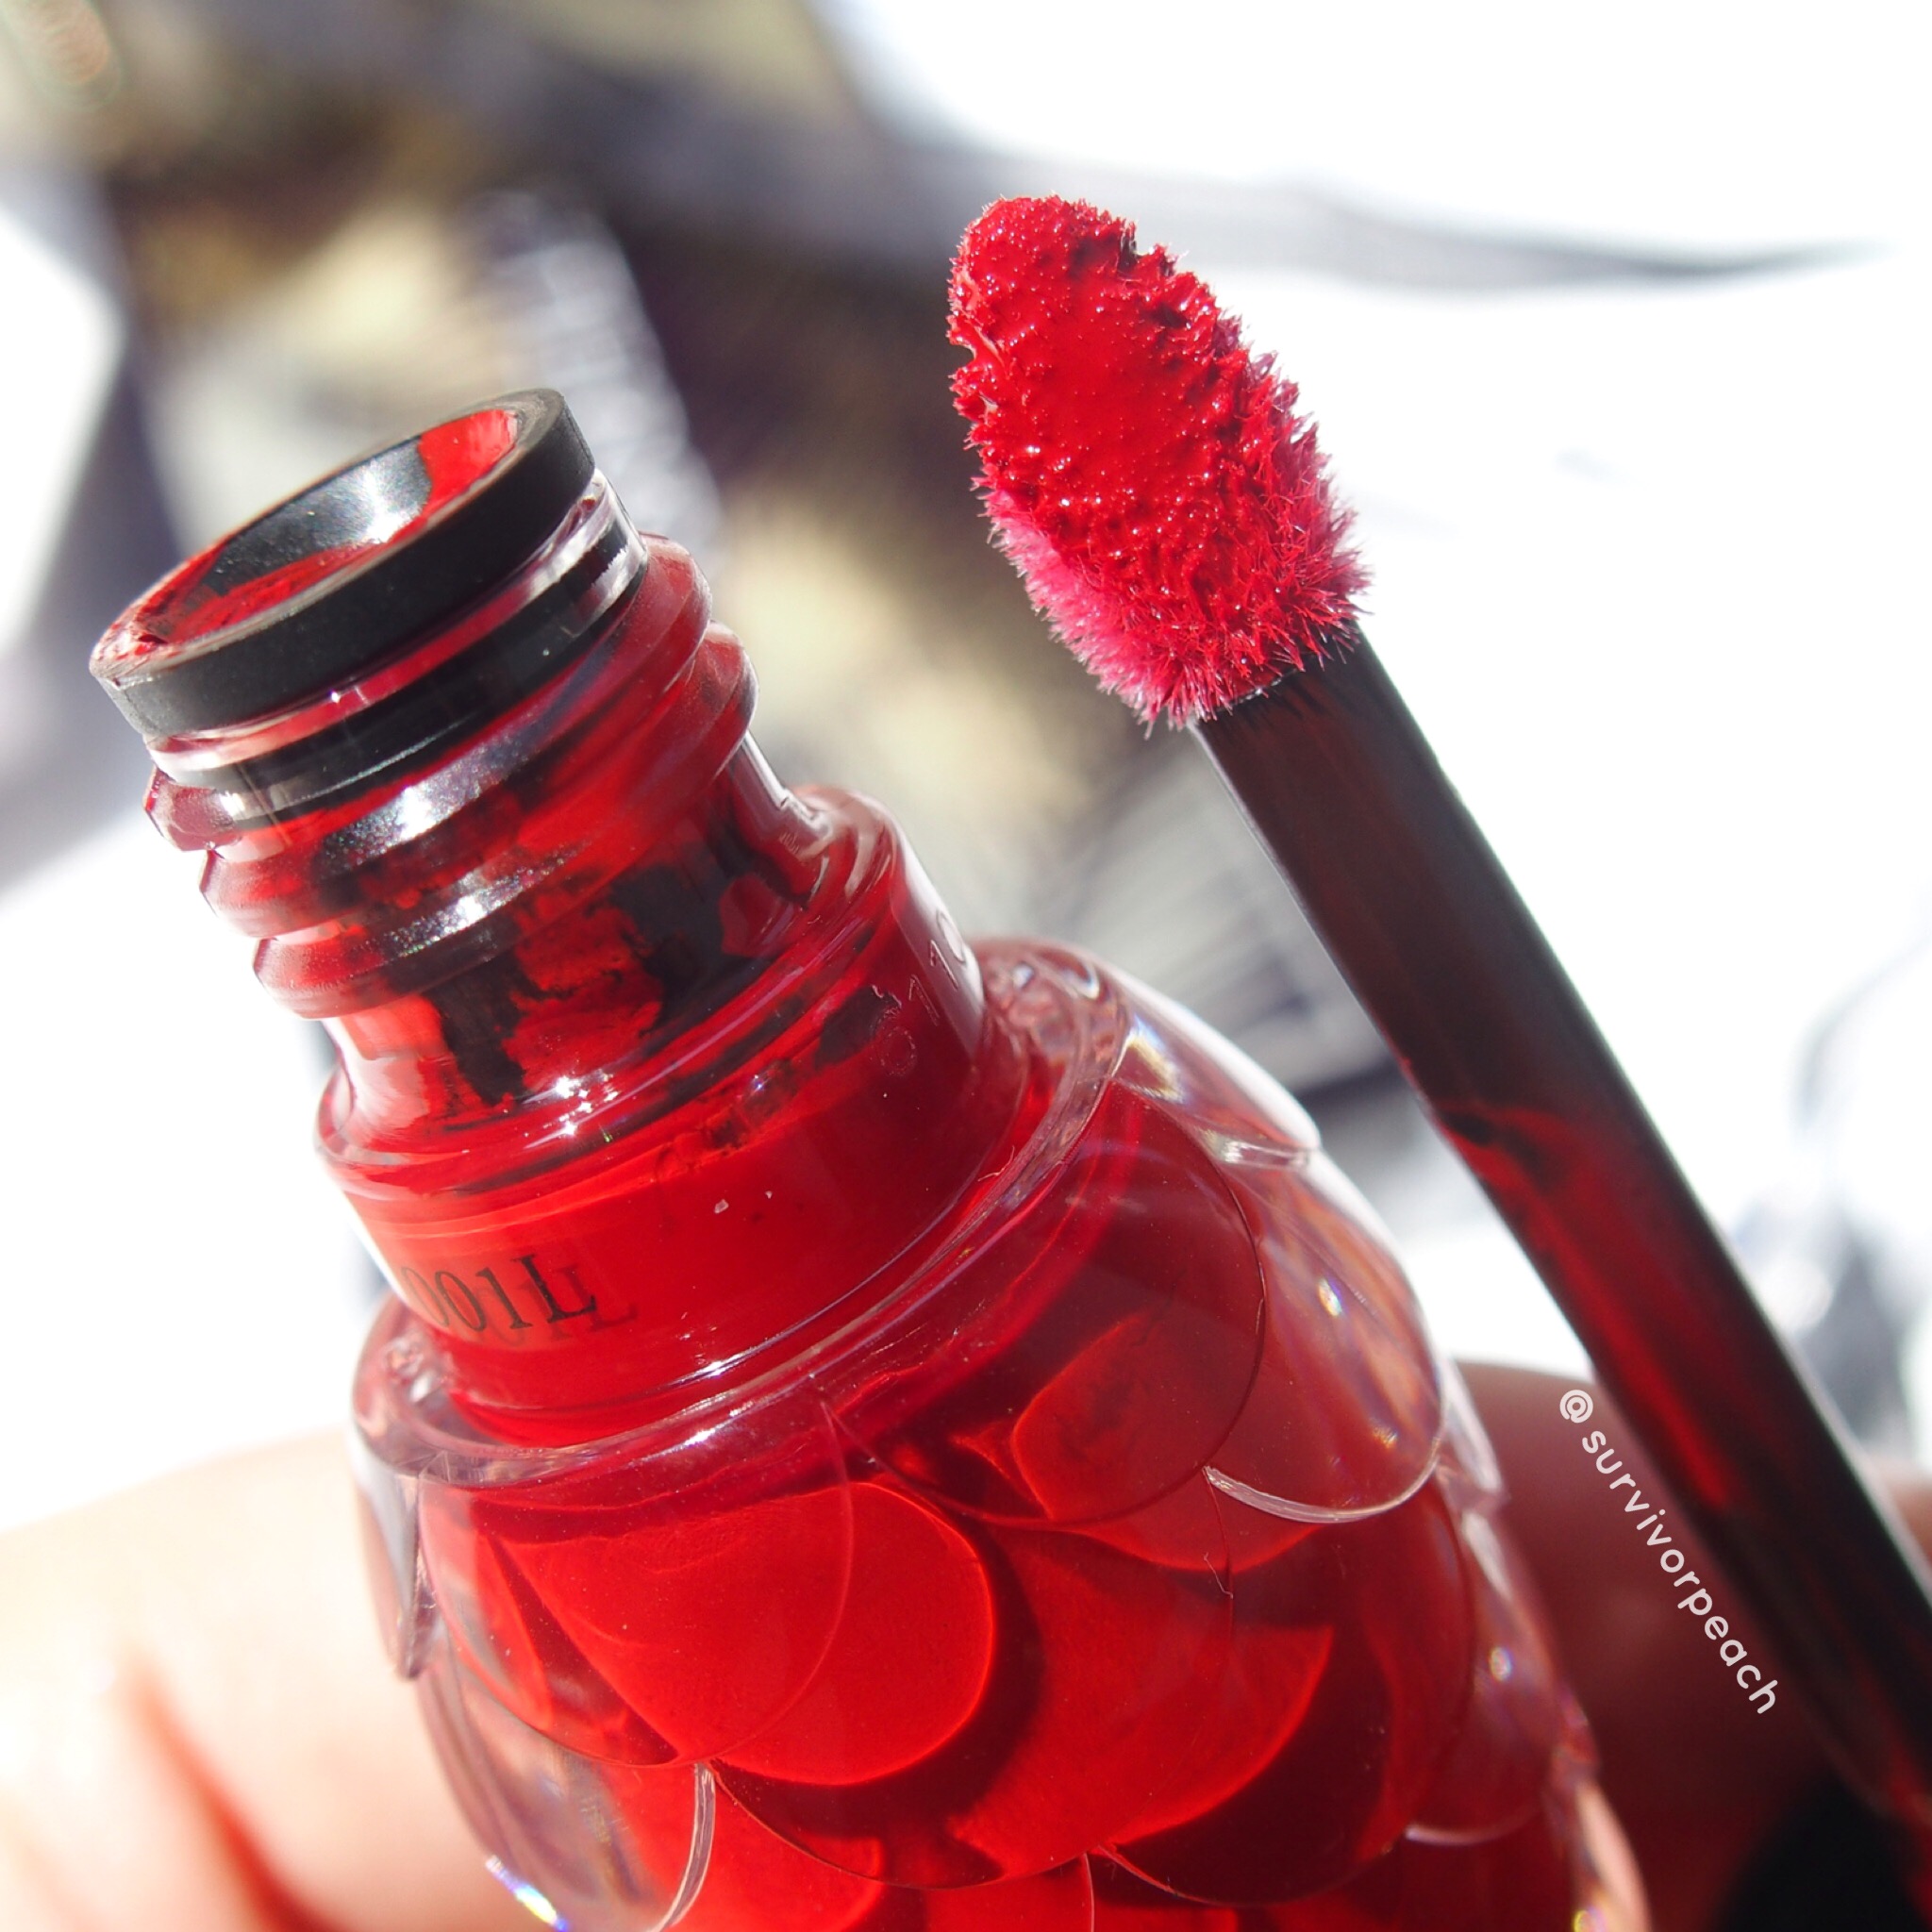 Louboutin Beauty: Lipsticks and Nail Polishes that can be used as